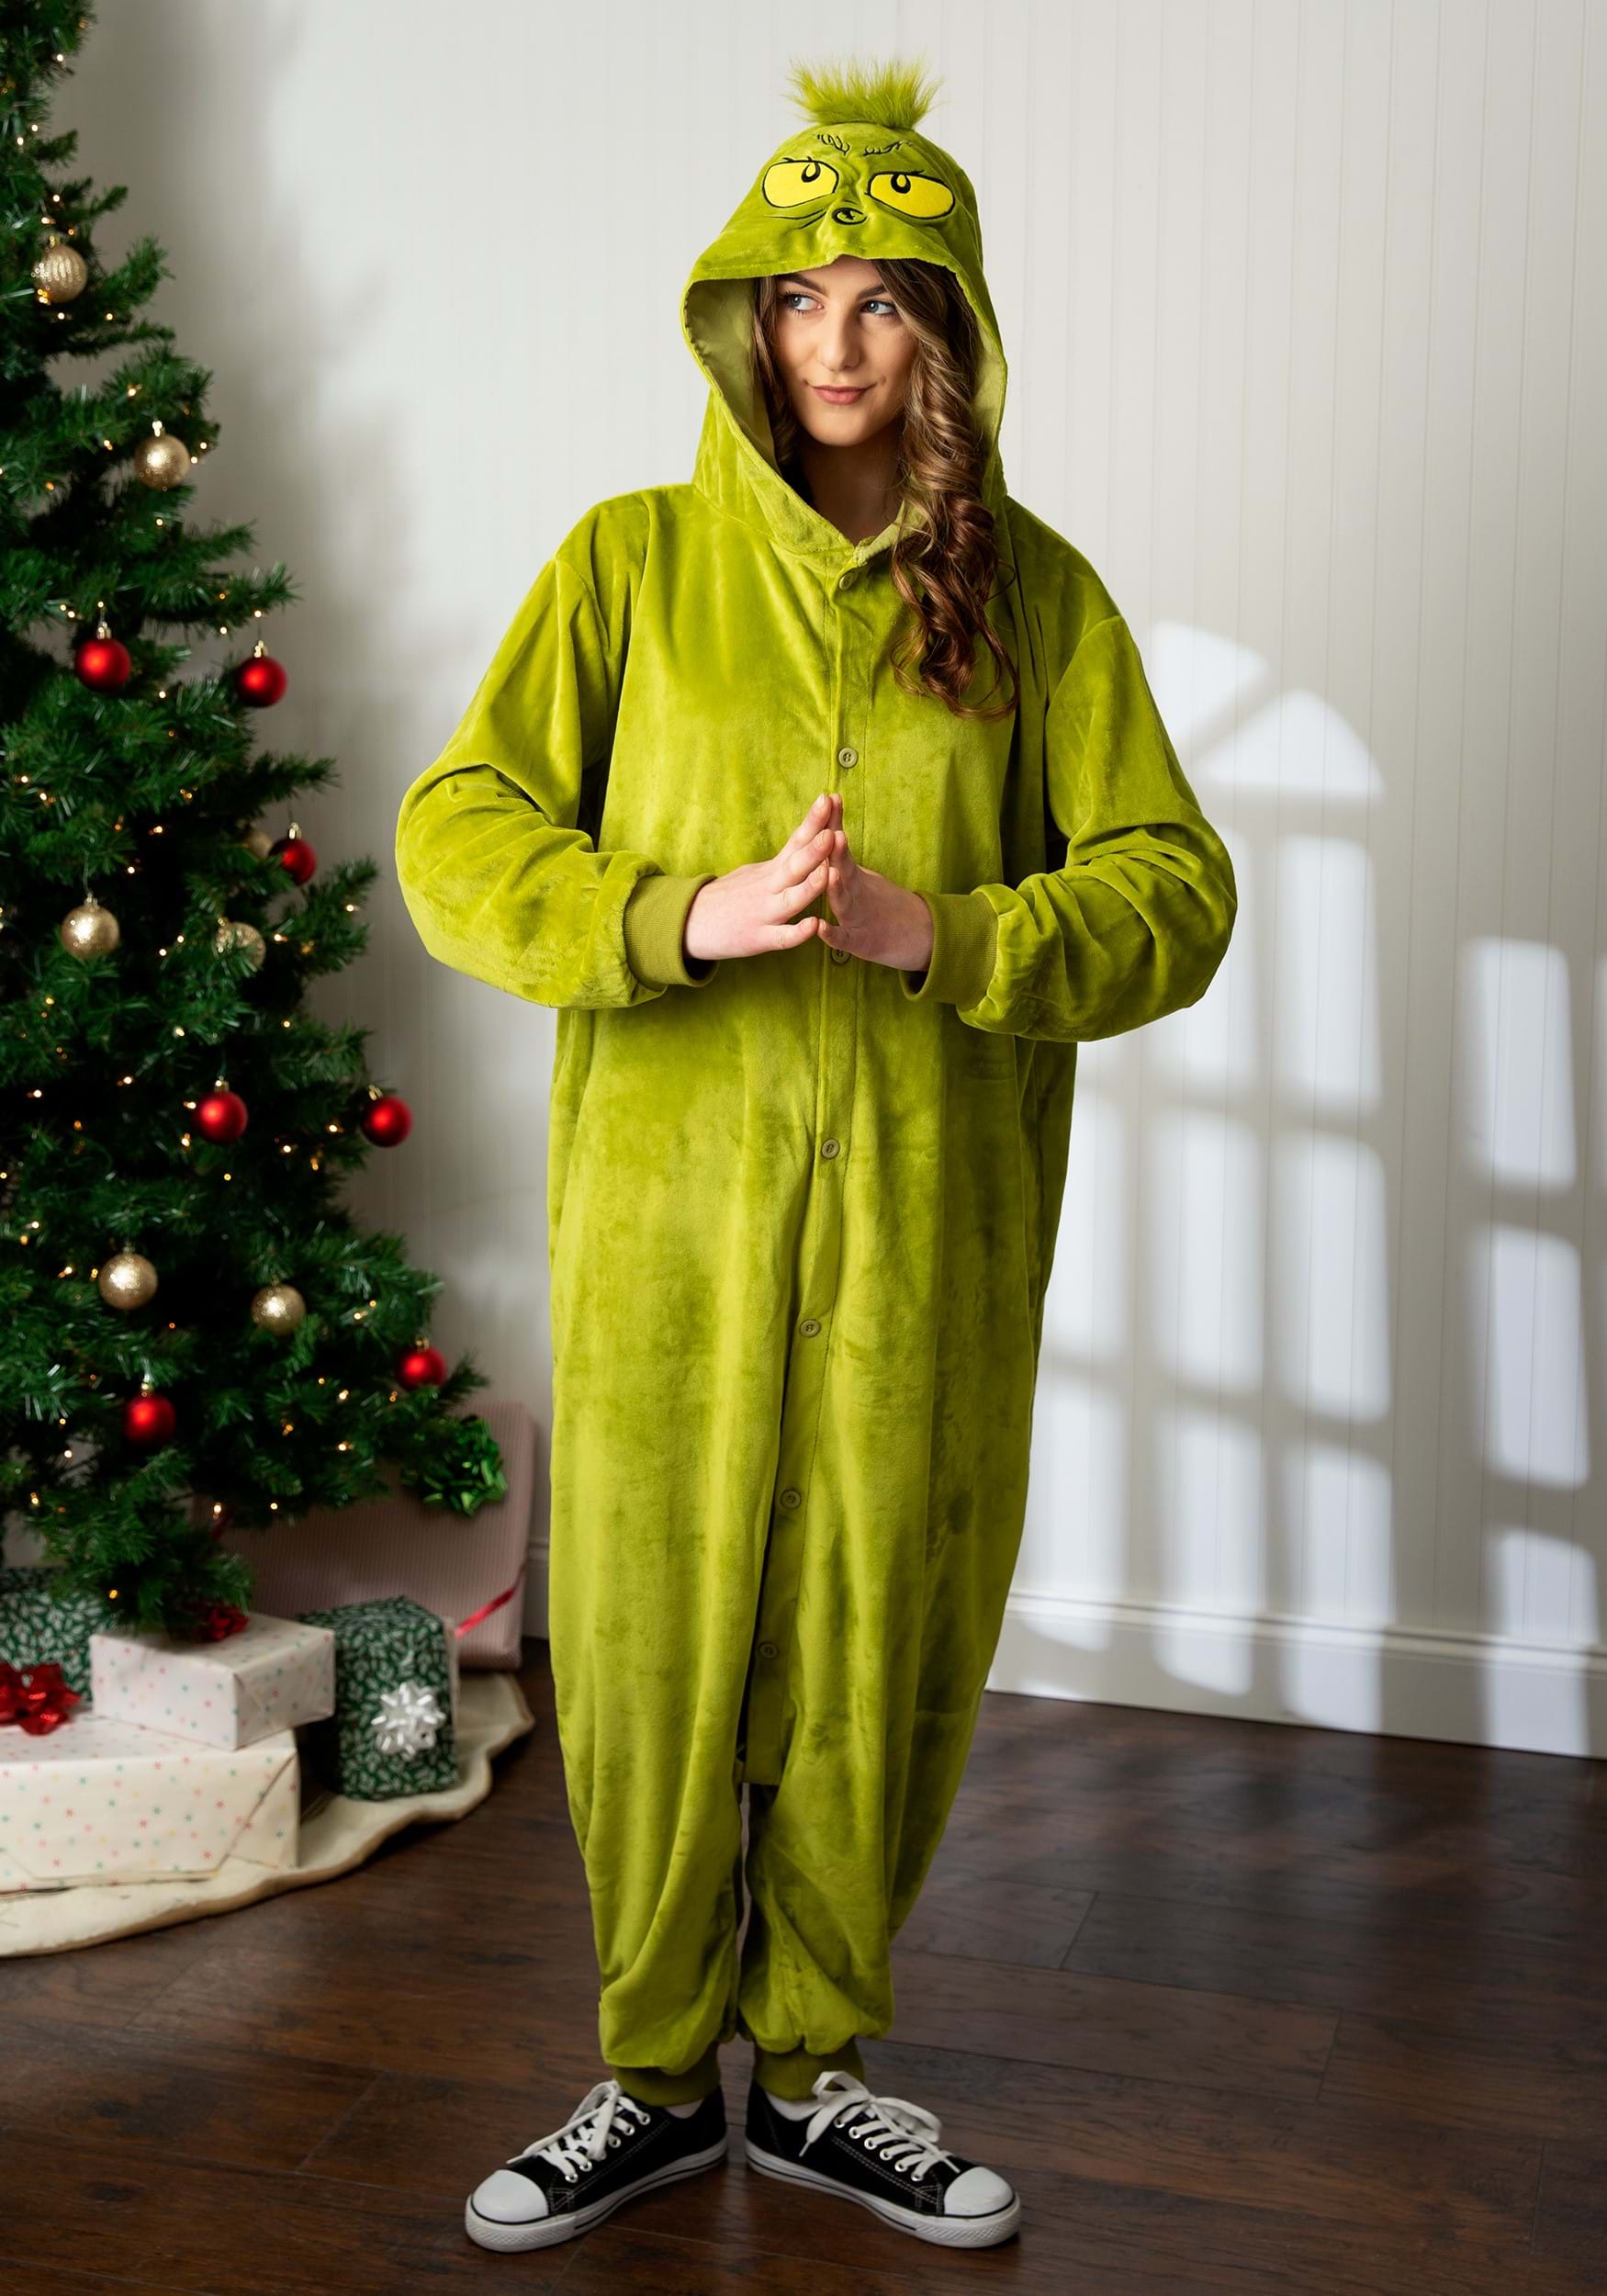 https://images.fun.com/products/46877/2-1-229976/the-grinch-adult-onesie-alt-5.jpg